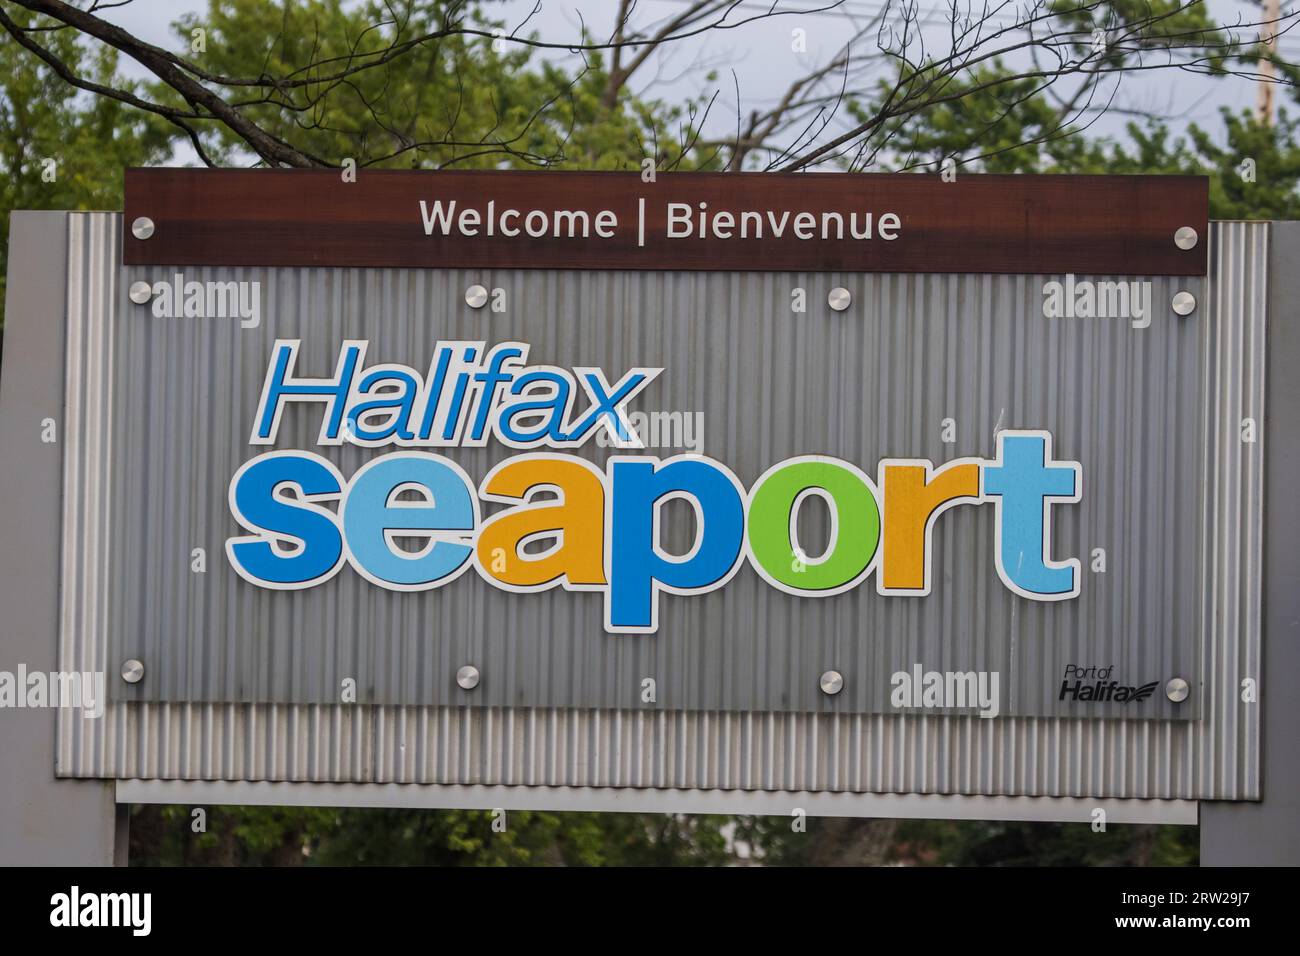 Halifax Seaport Cruise ship Terminal Waterfront sign board with key point of interests, information and landmark display board. HALIFAX, NOVA SCOTIA Stock Photo